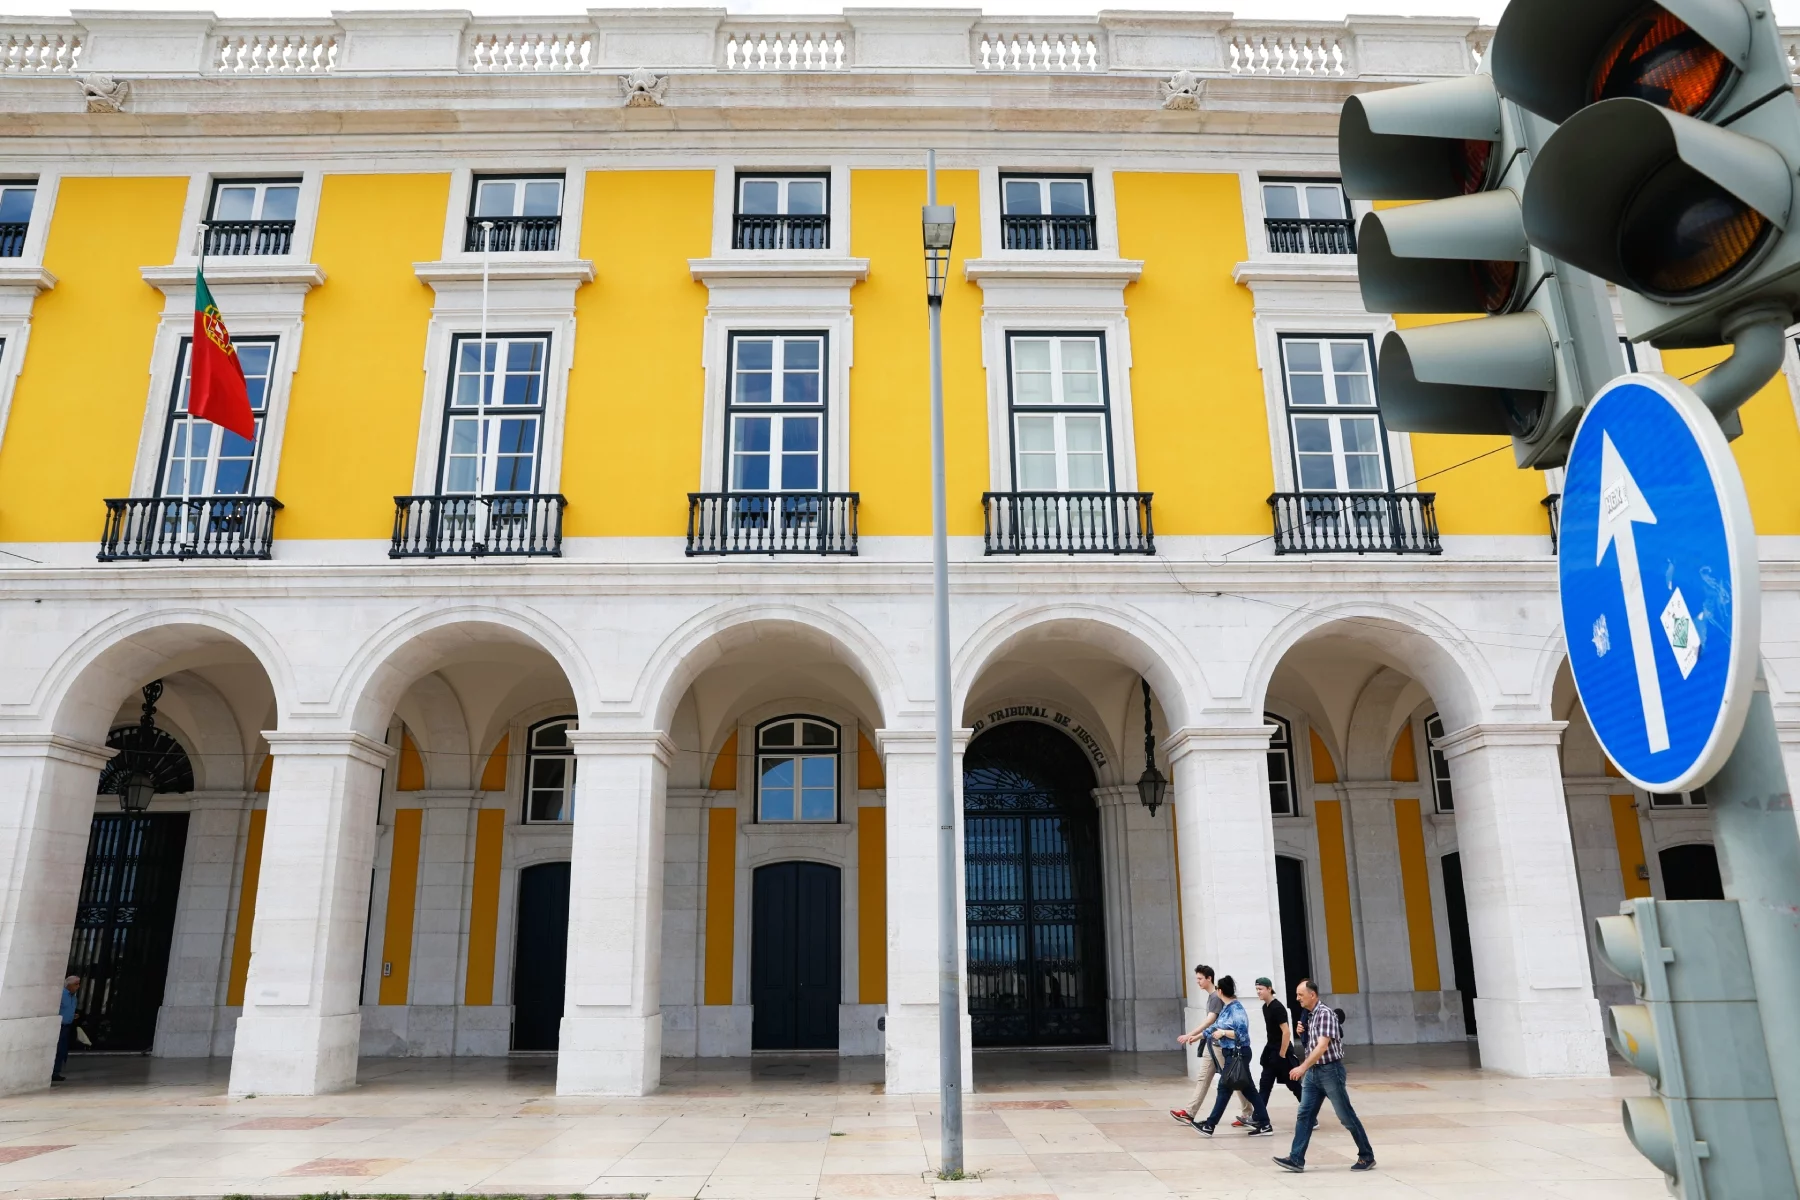 People walking pas the Ministry of Justice in Portugal: large, grand, old-fashioned building, yellow edifice.